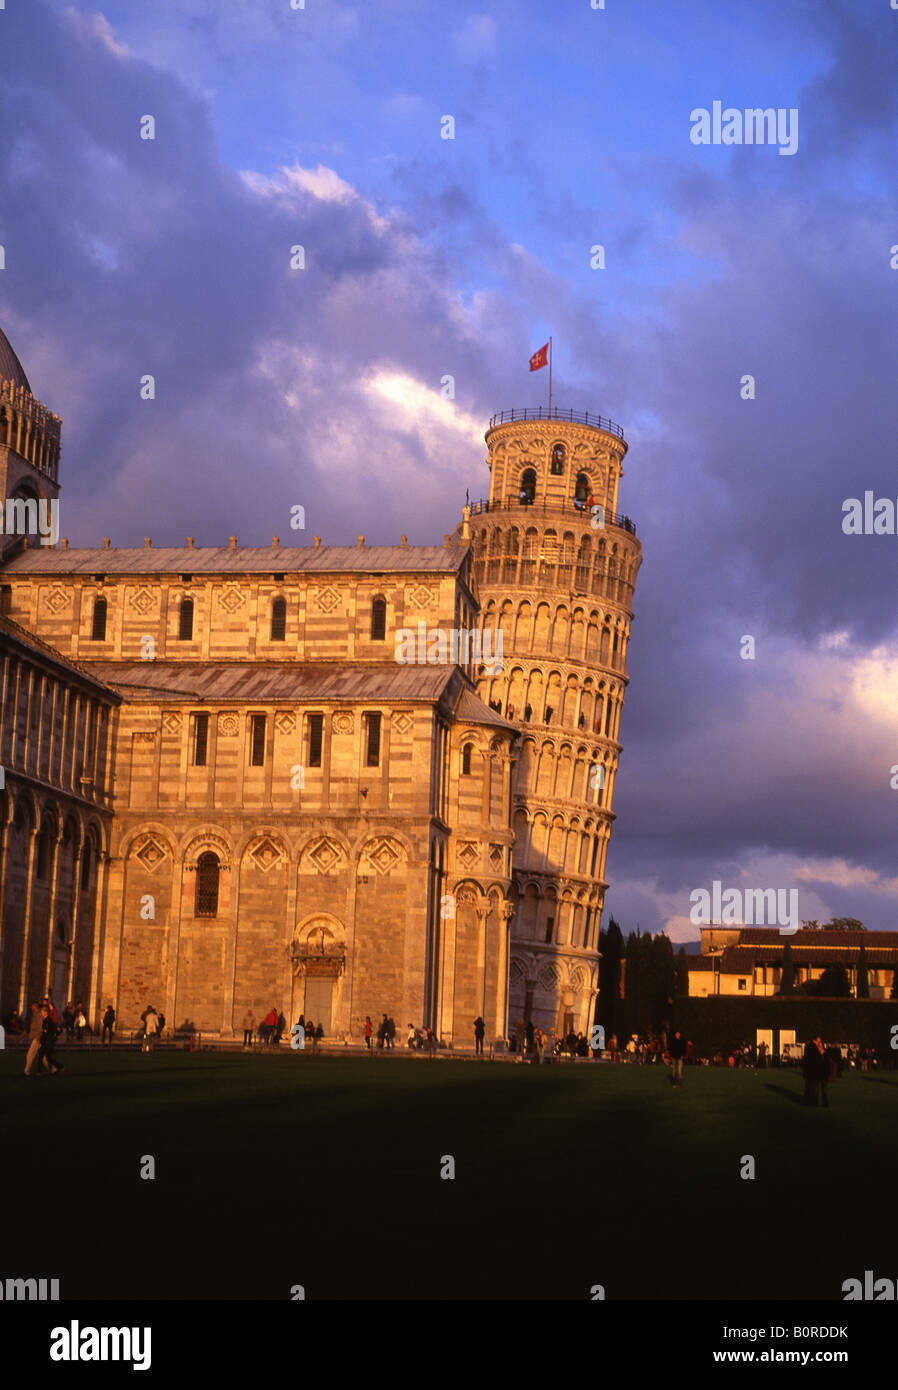 Leaning Tower of Pisa at sunset Pisa Tuscany Italy Stock Photo